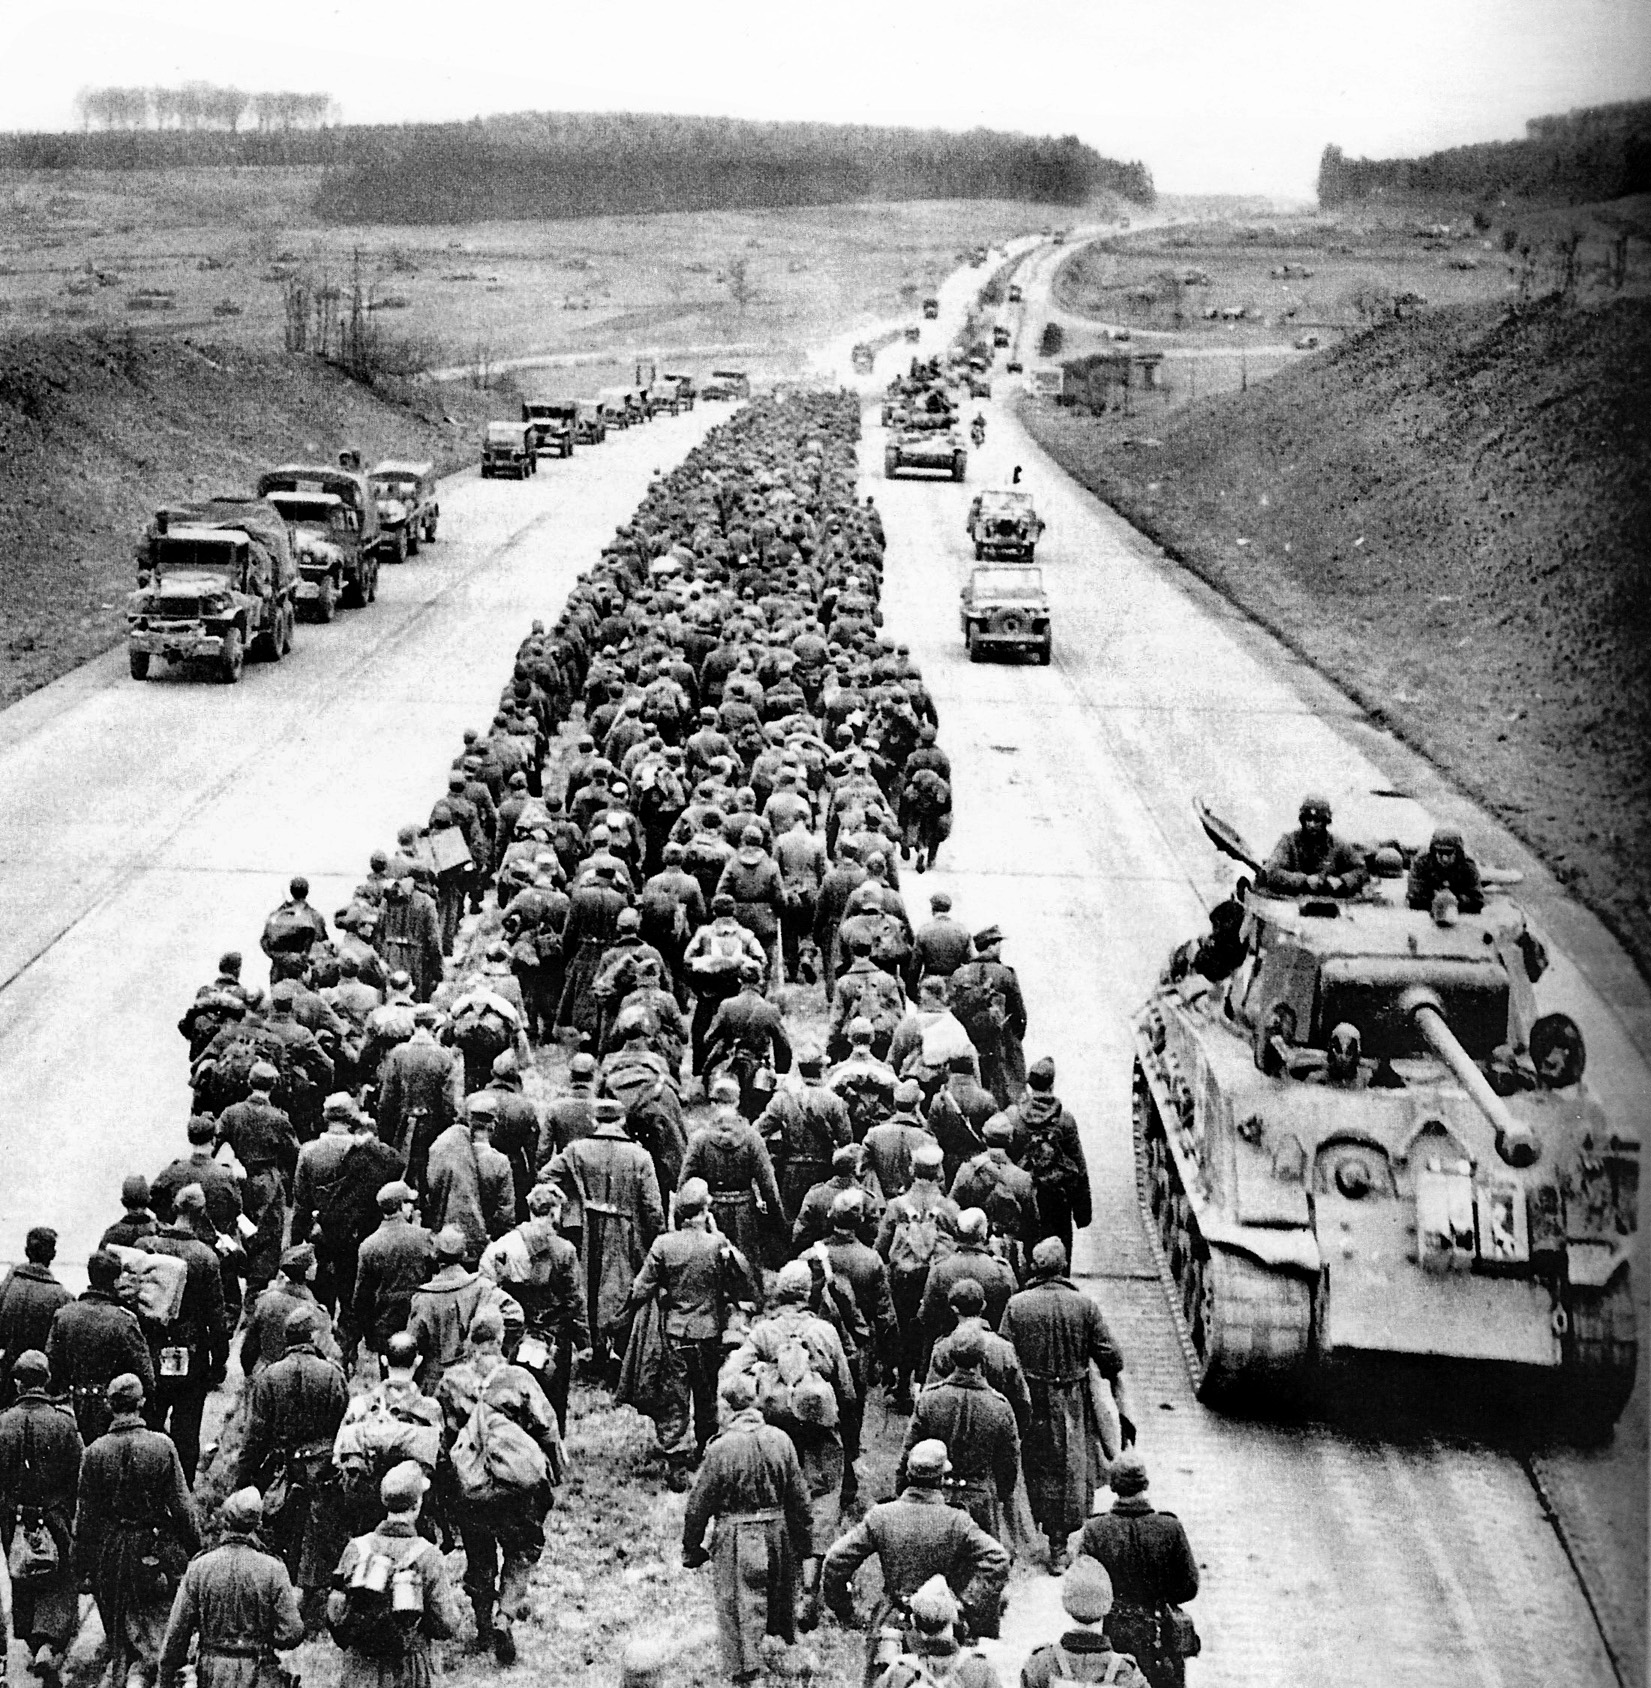 American trucks, tanks, and jeeps roll eastward along an autobahn while thousands of German troops march west down the median on their way to a POW enclosure. 